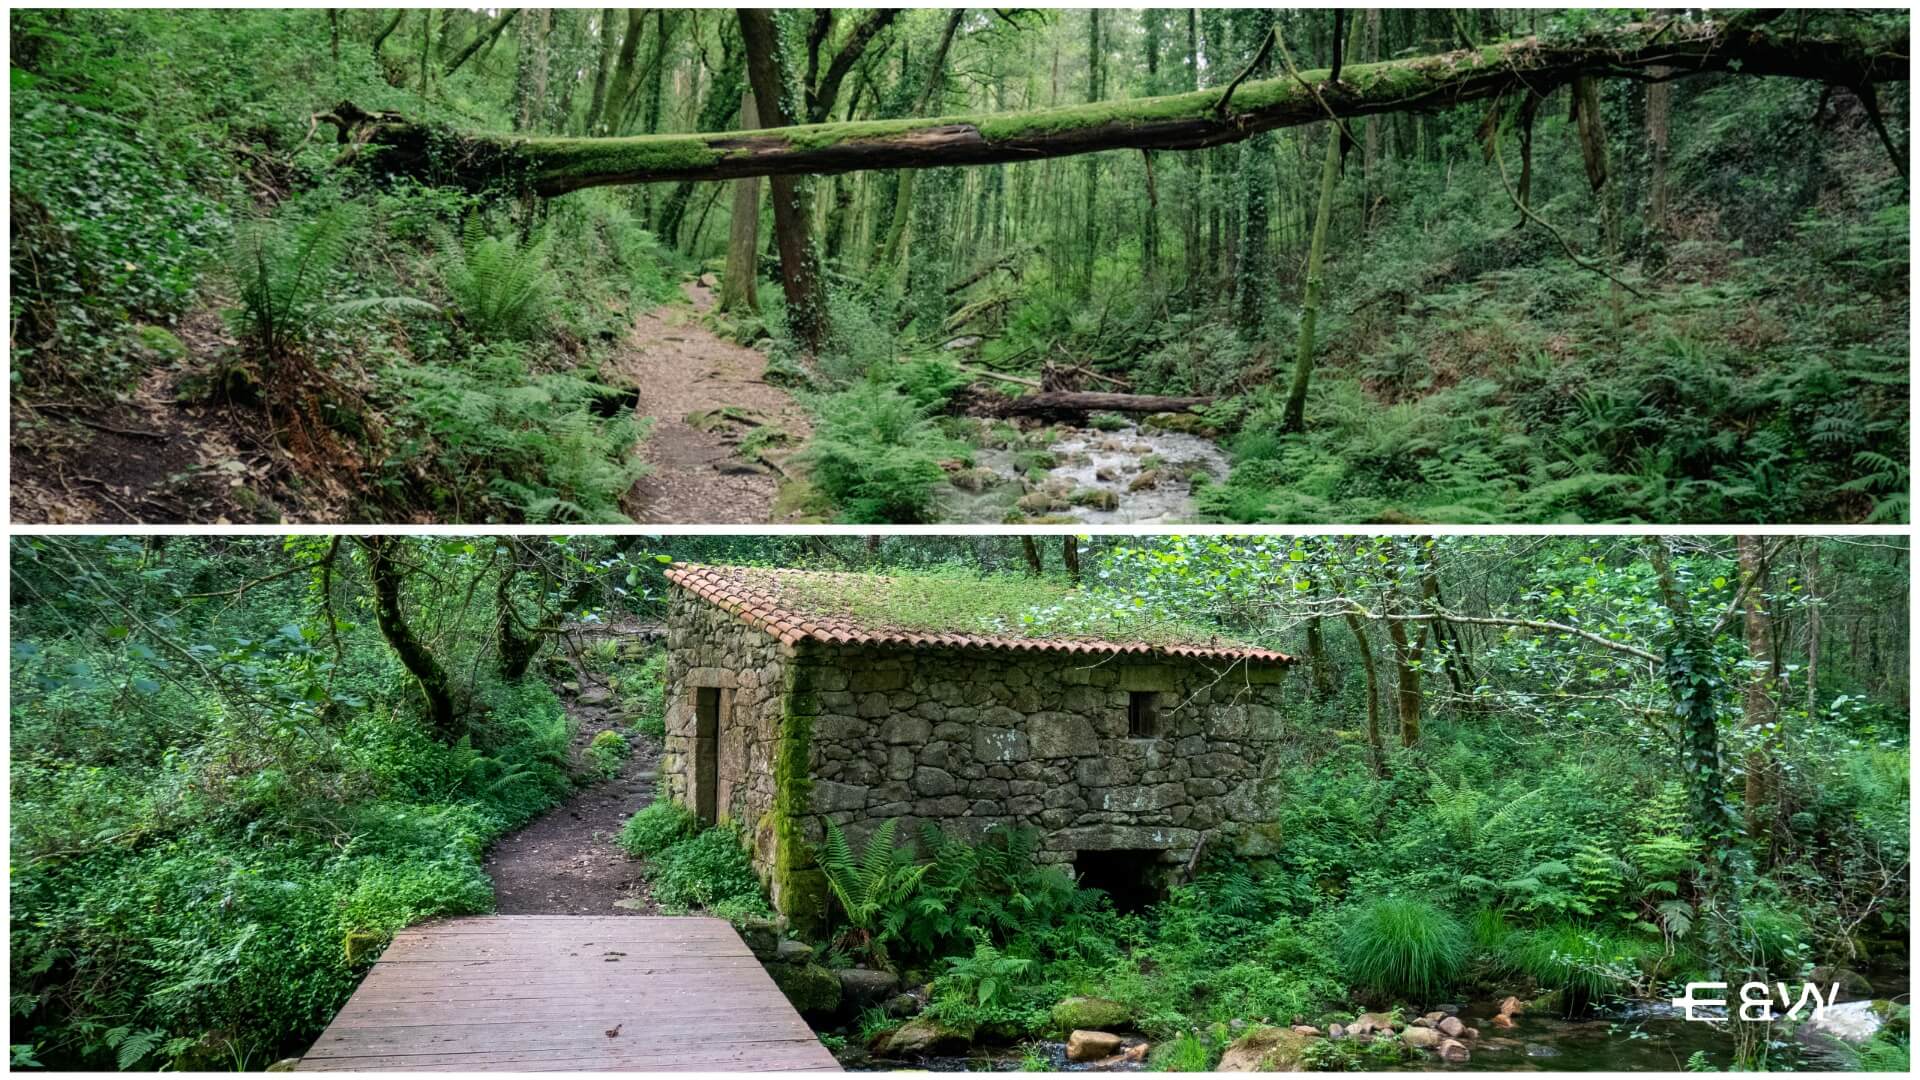 Top 8 Things to do in Moaña, Galicia, Spain - 2. Walk the Magical and Enchanted A Fraga Trail